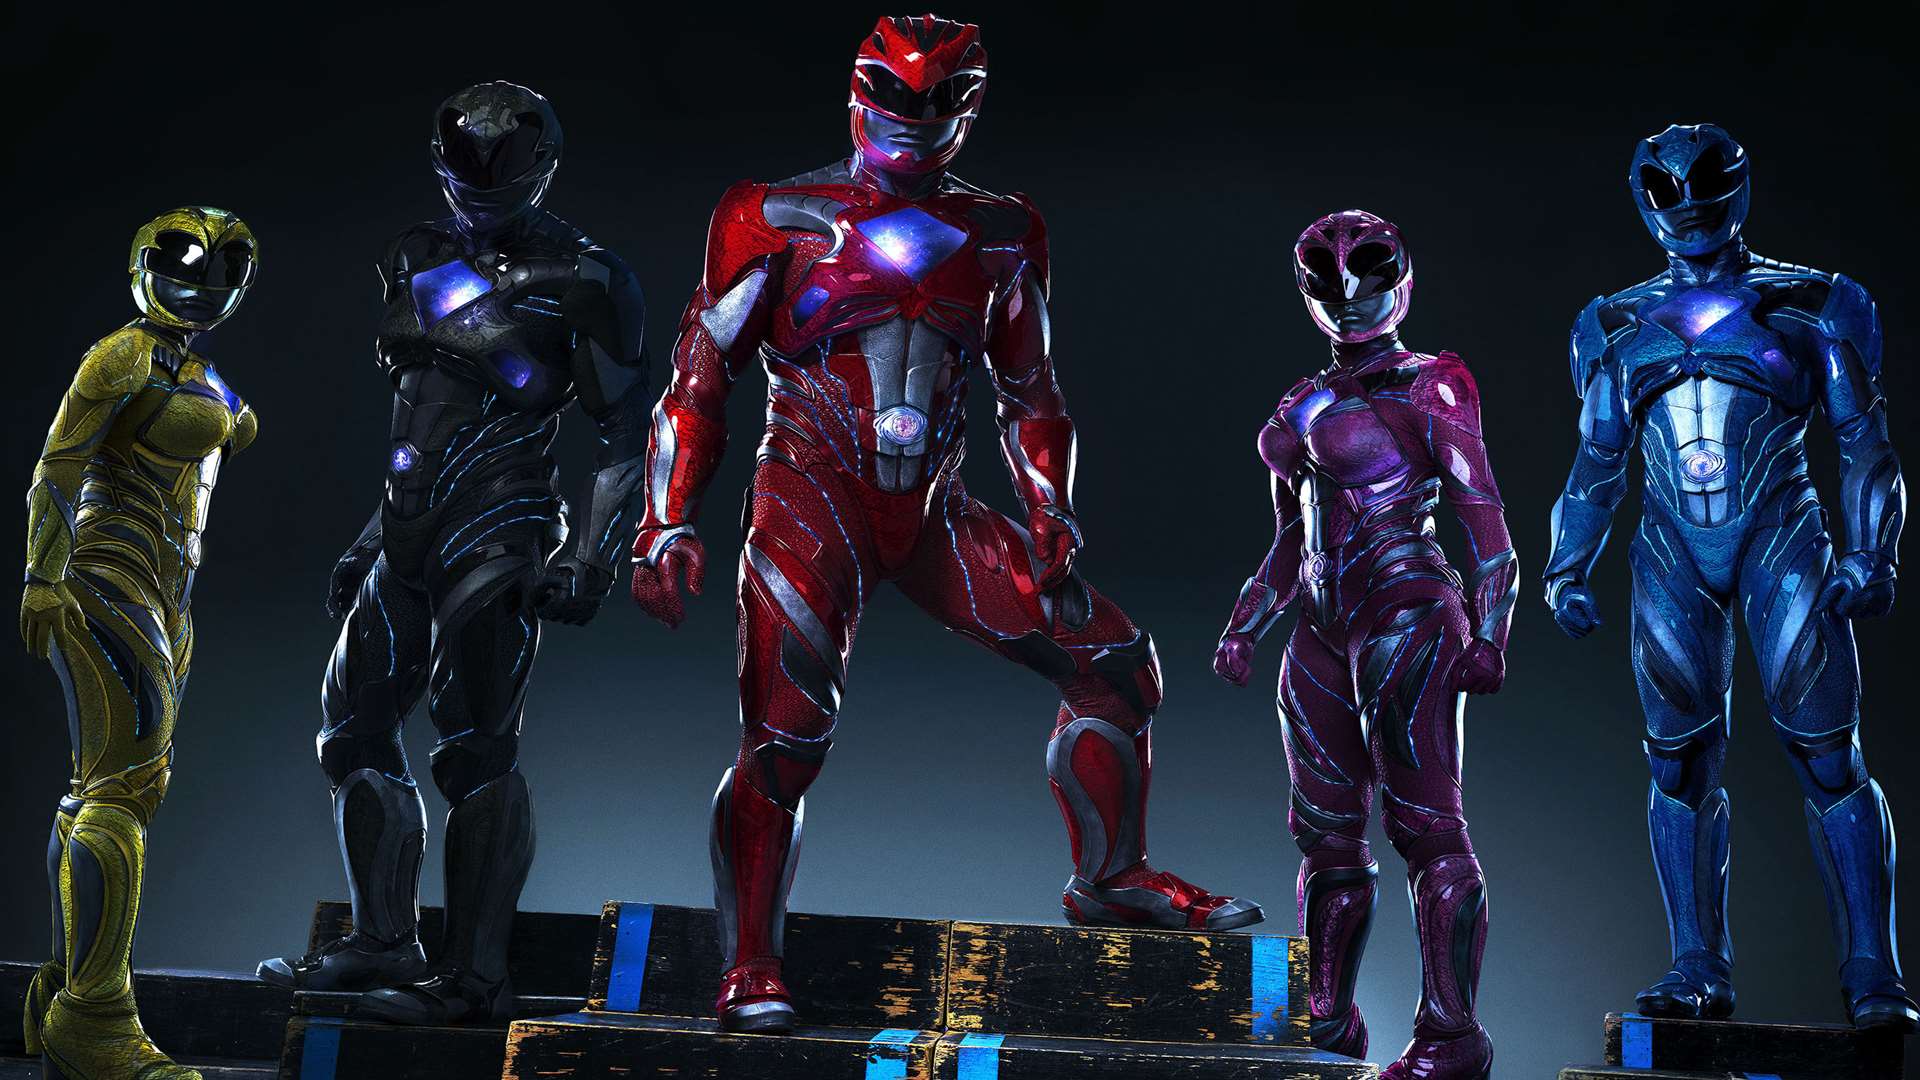 Power Rangers follows five ordinary high school kids who become something extraordinary